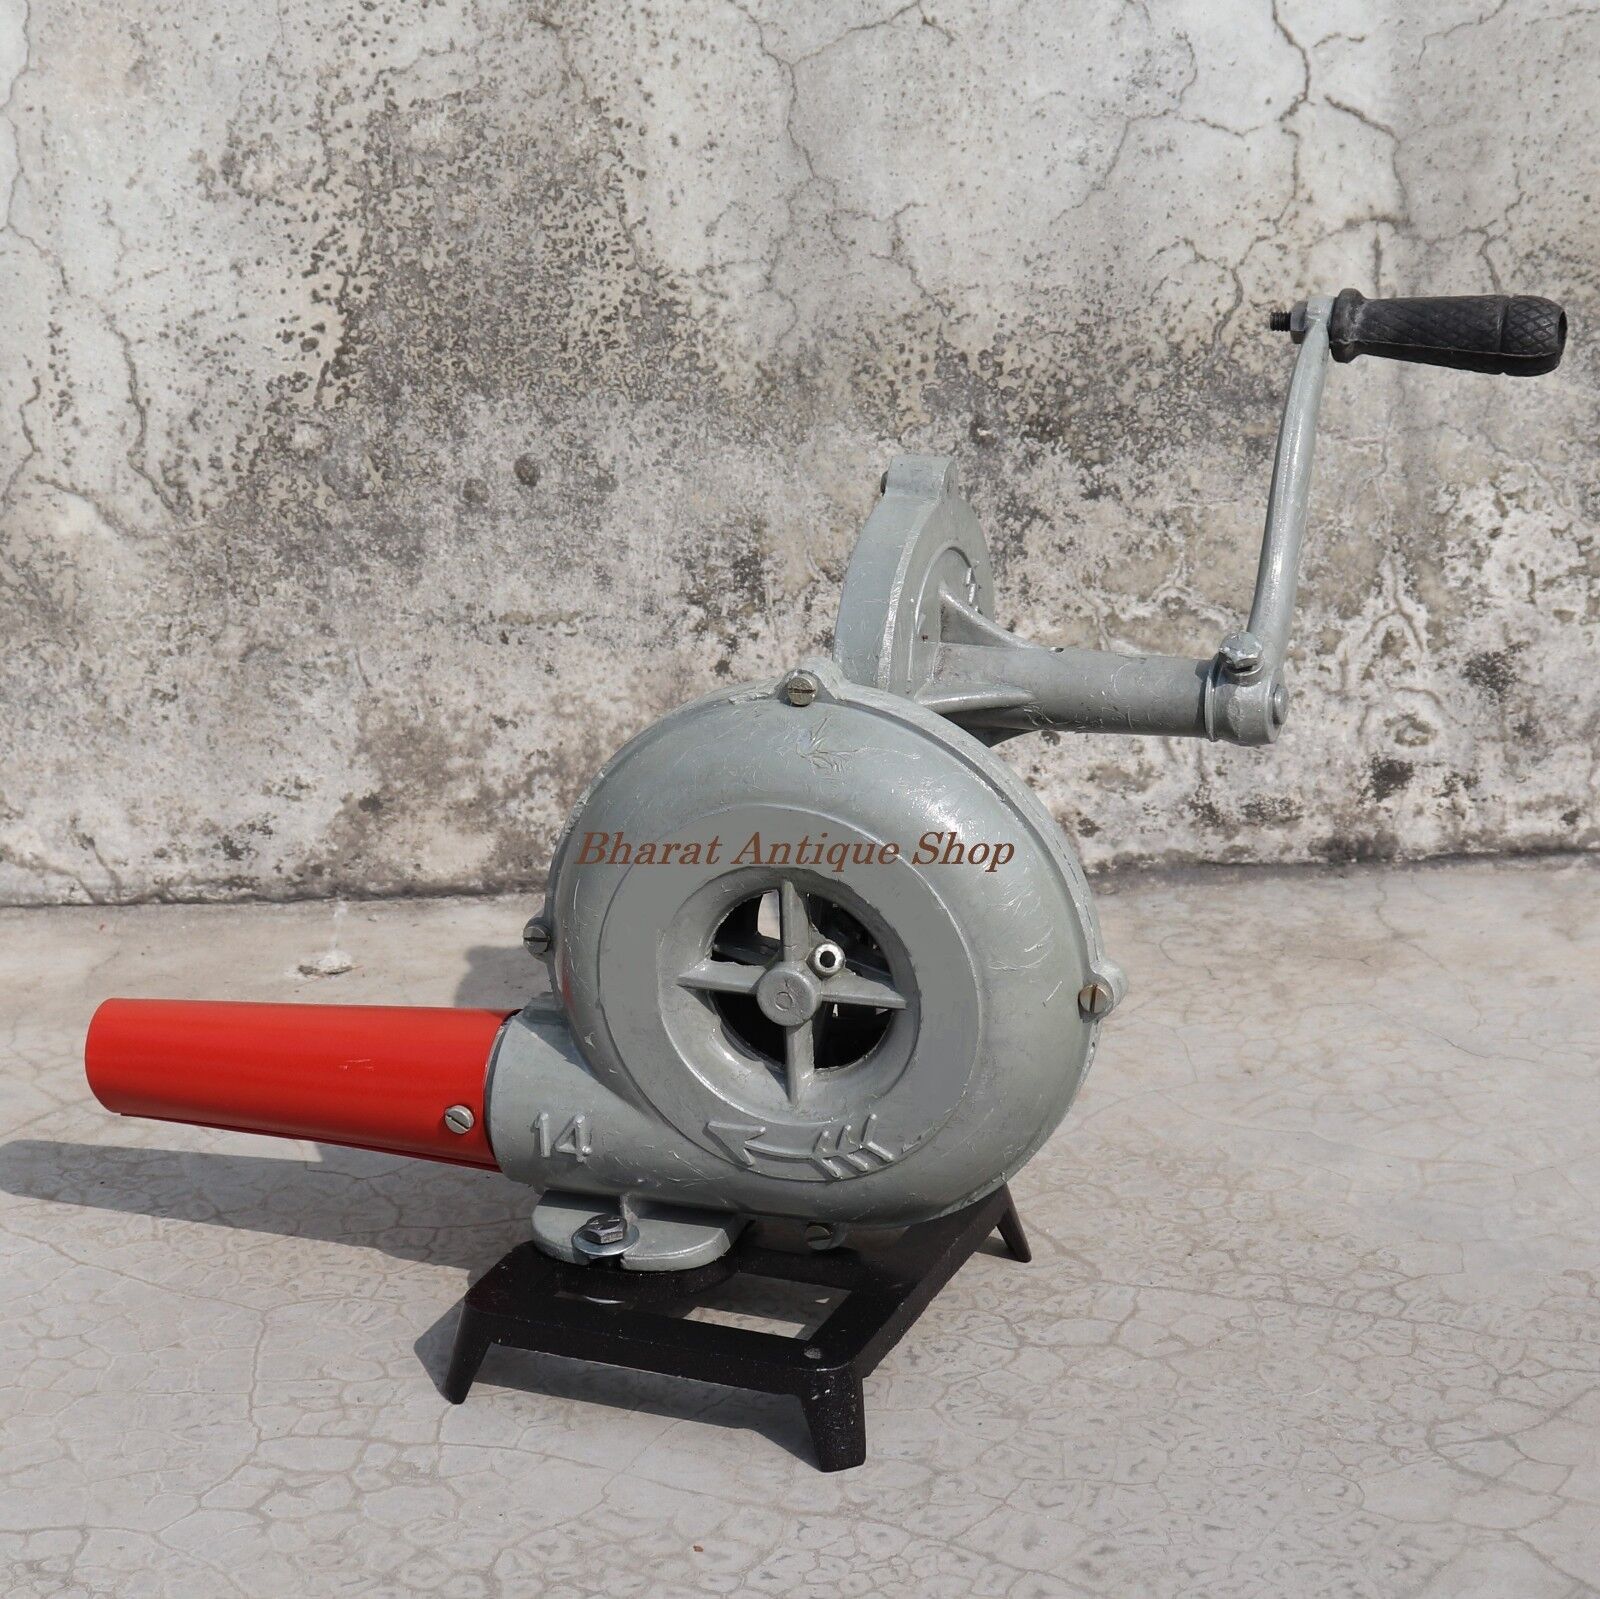 Forge Furnace Vintage Style With Hand Blower Pedal Type Handle Blacksmiths